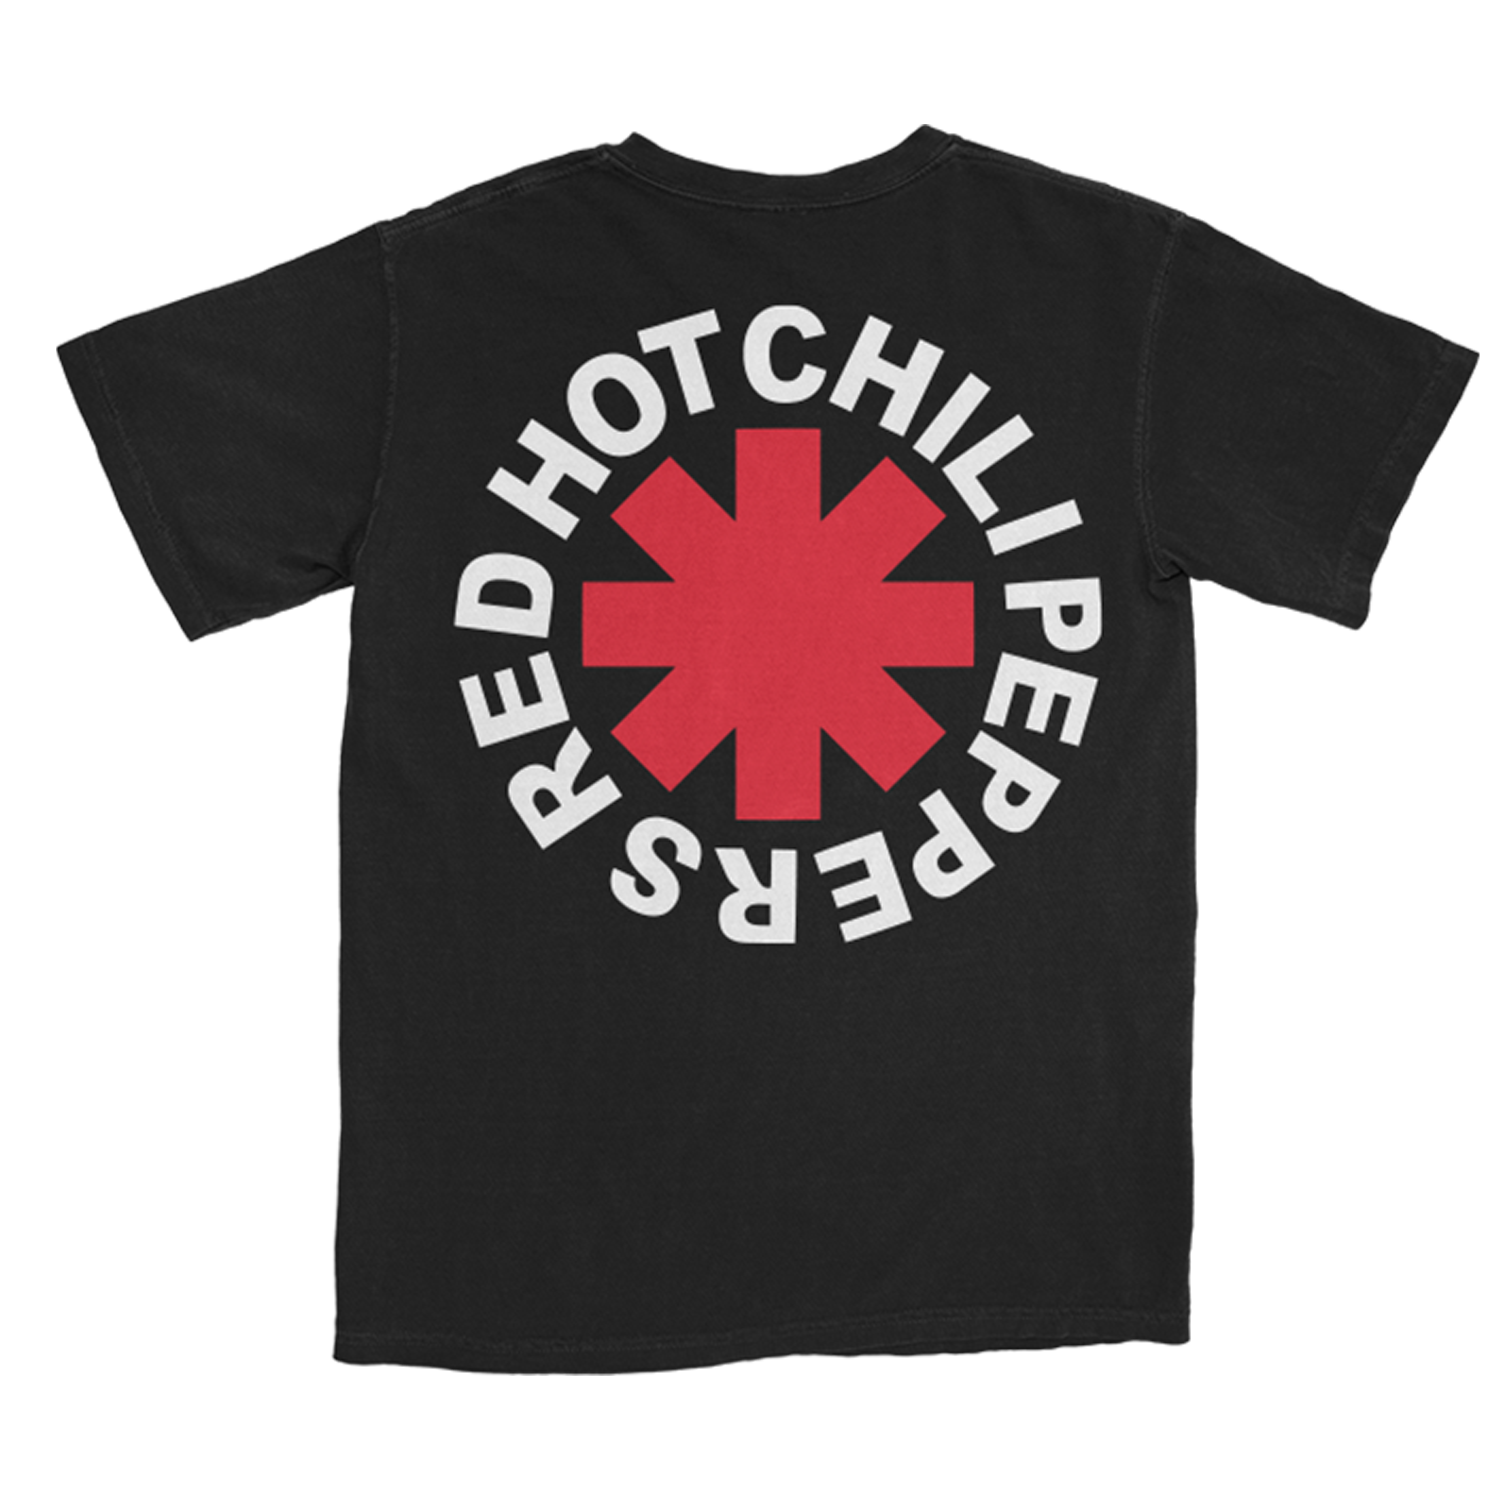 Red Hot Chili Peppers 　tシャツ